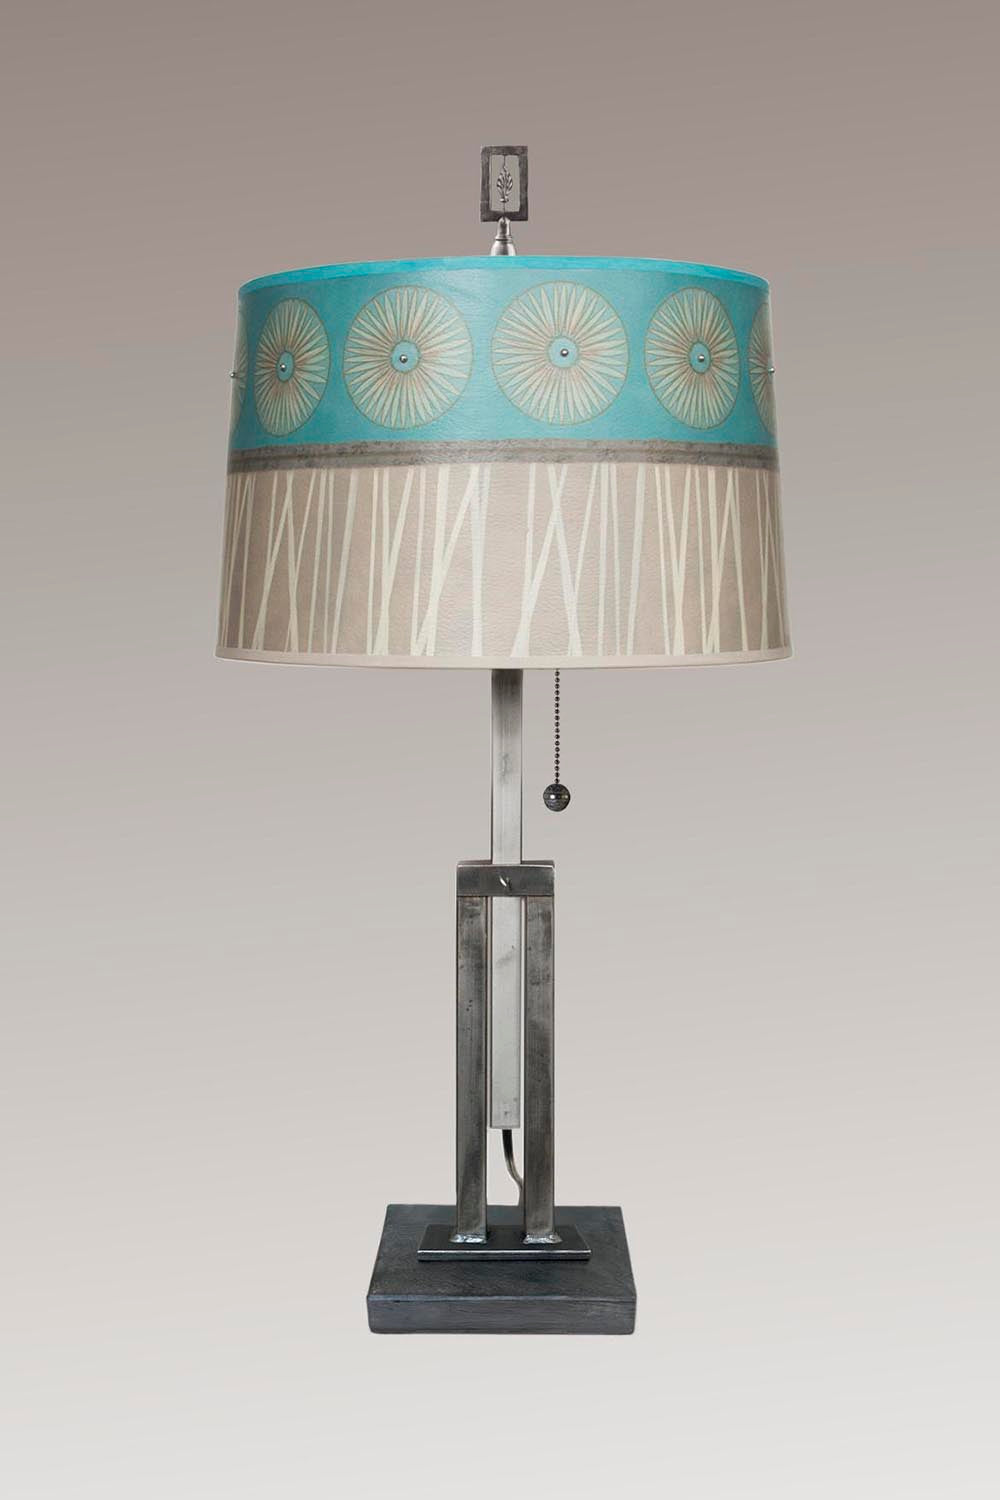 Janna Ugone & Co Table Lamps Adjustable-Height Steel Table Lamp with Large Drum Shade in Pool